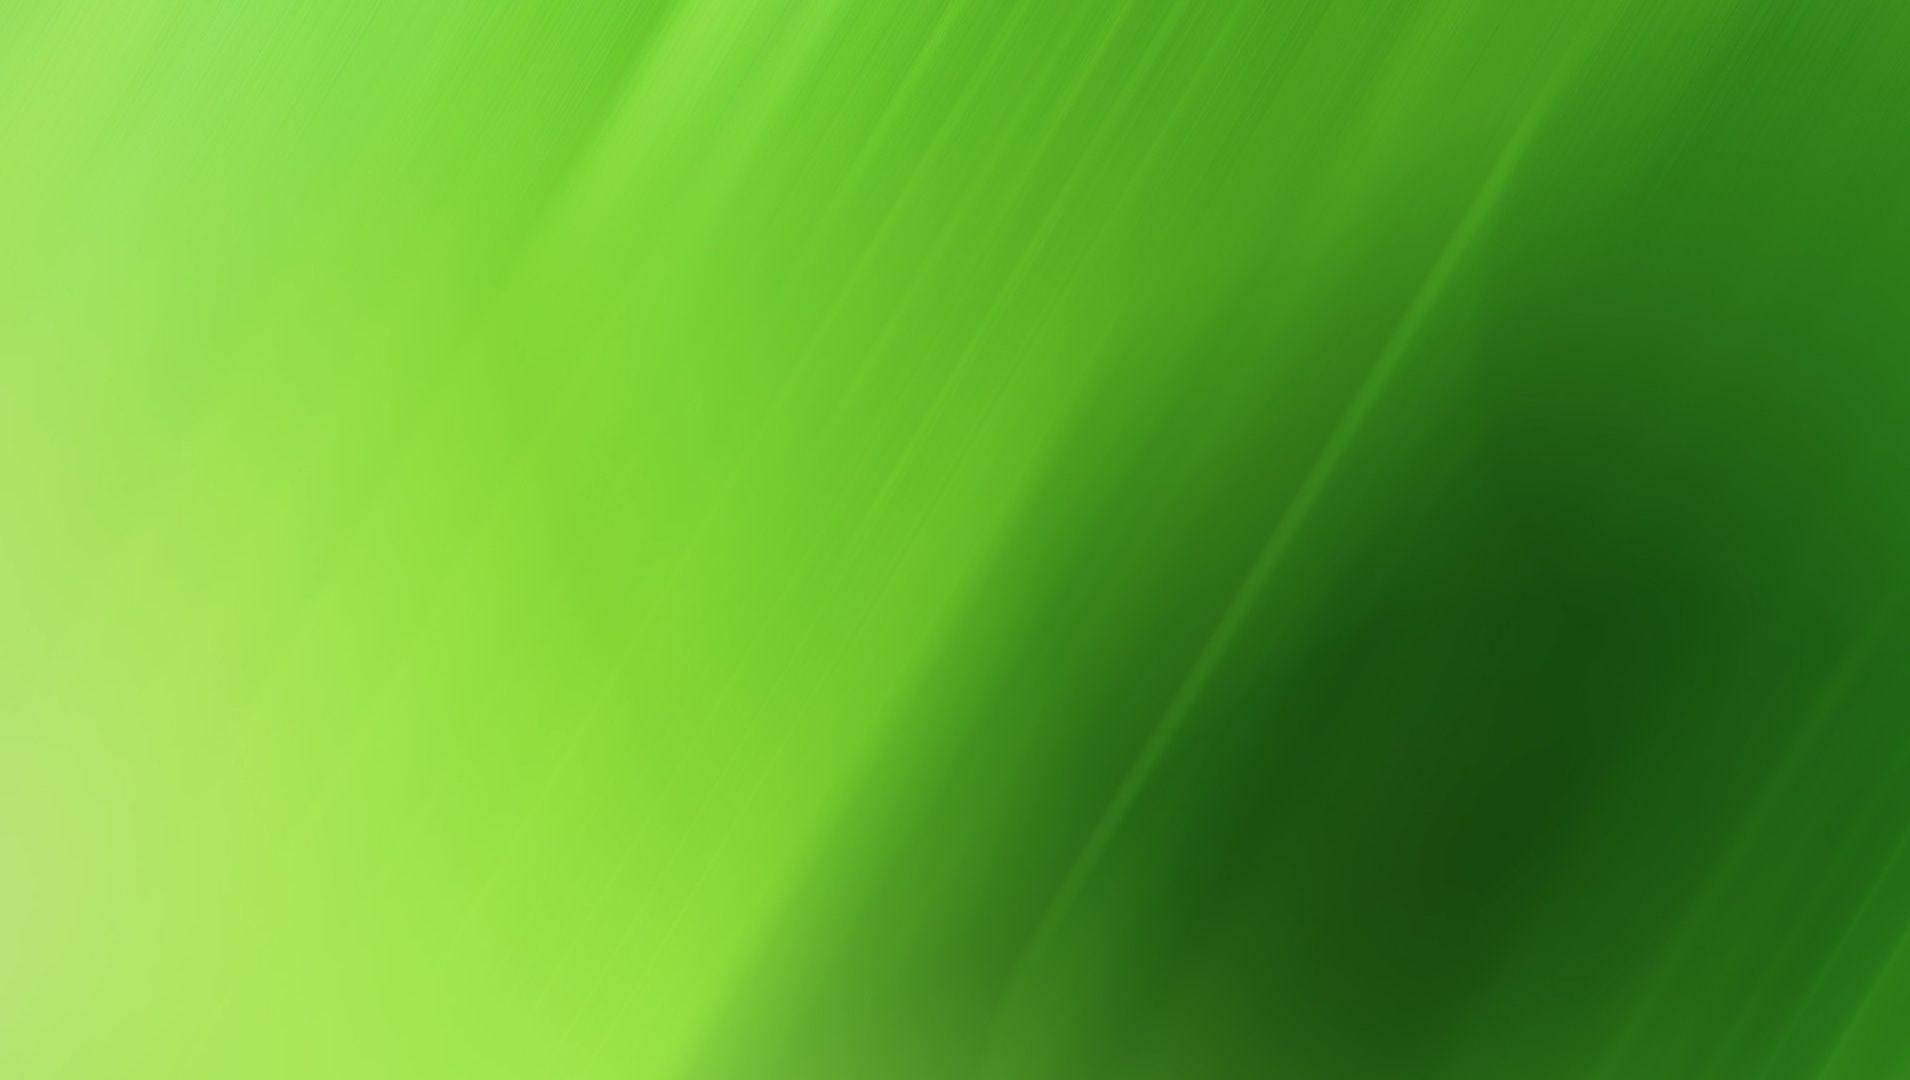 Dark and Light Green Free and Wallpaper